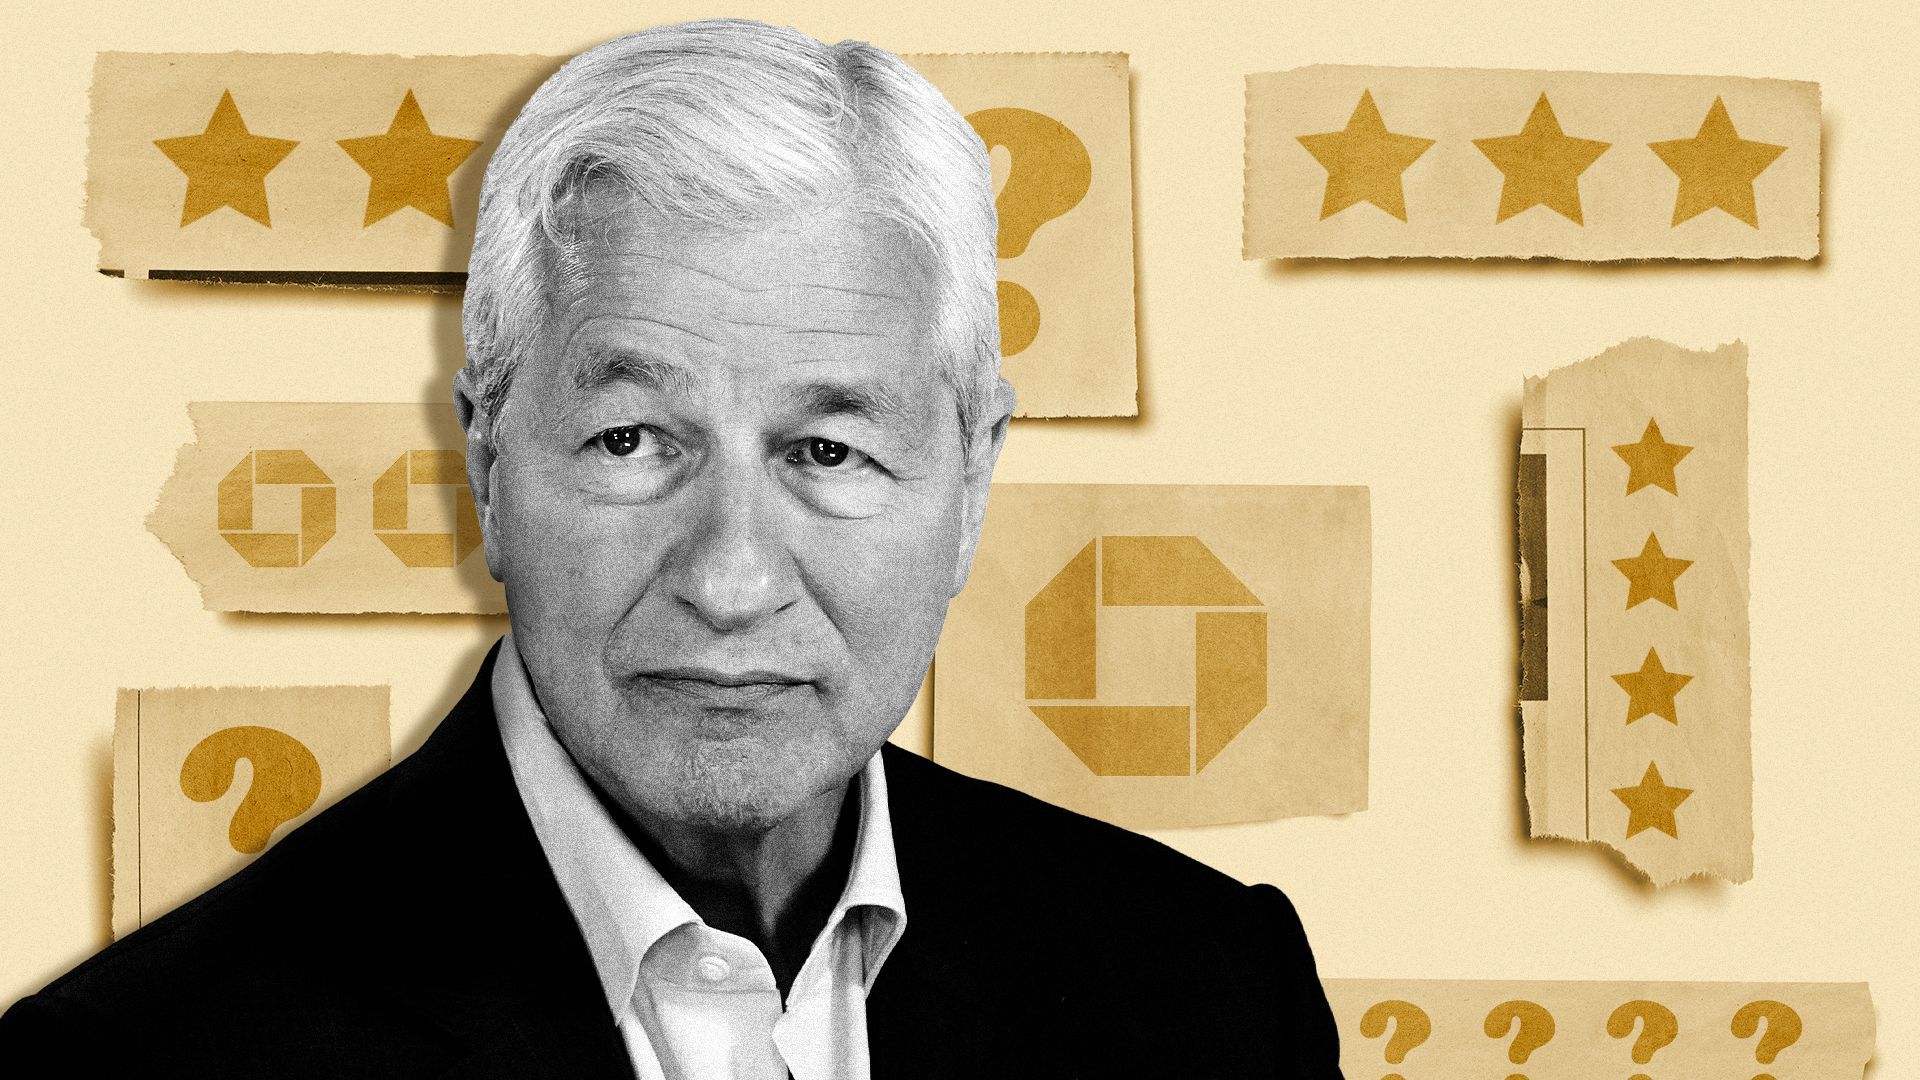 Photo Illustration of Jamie Dimon with ripped newspaper elements with stars, the Chase logo